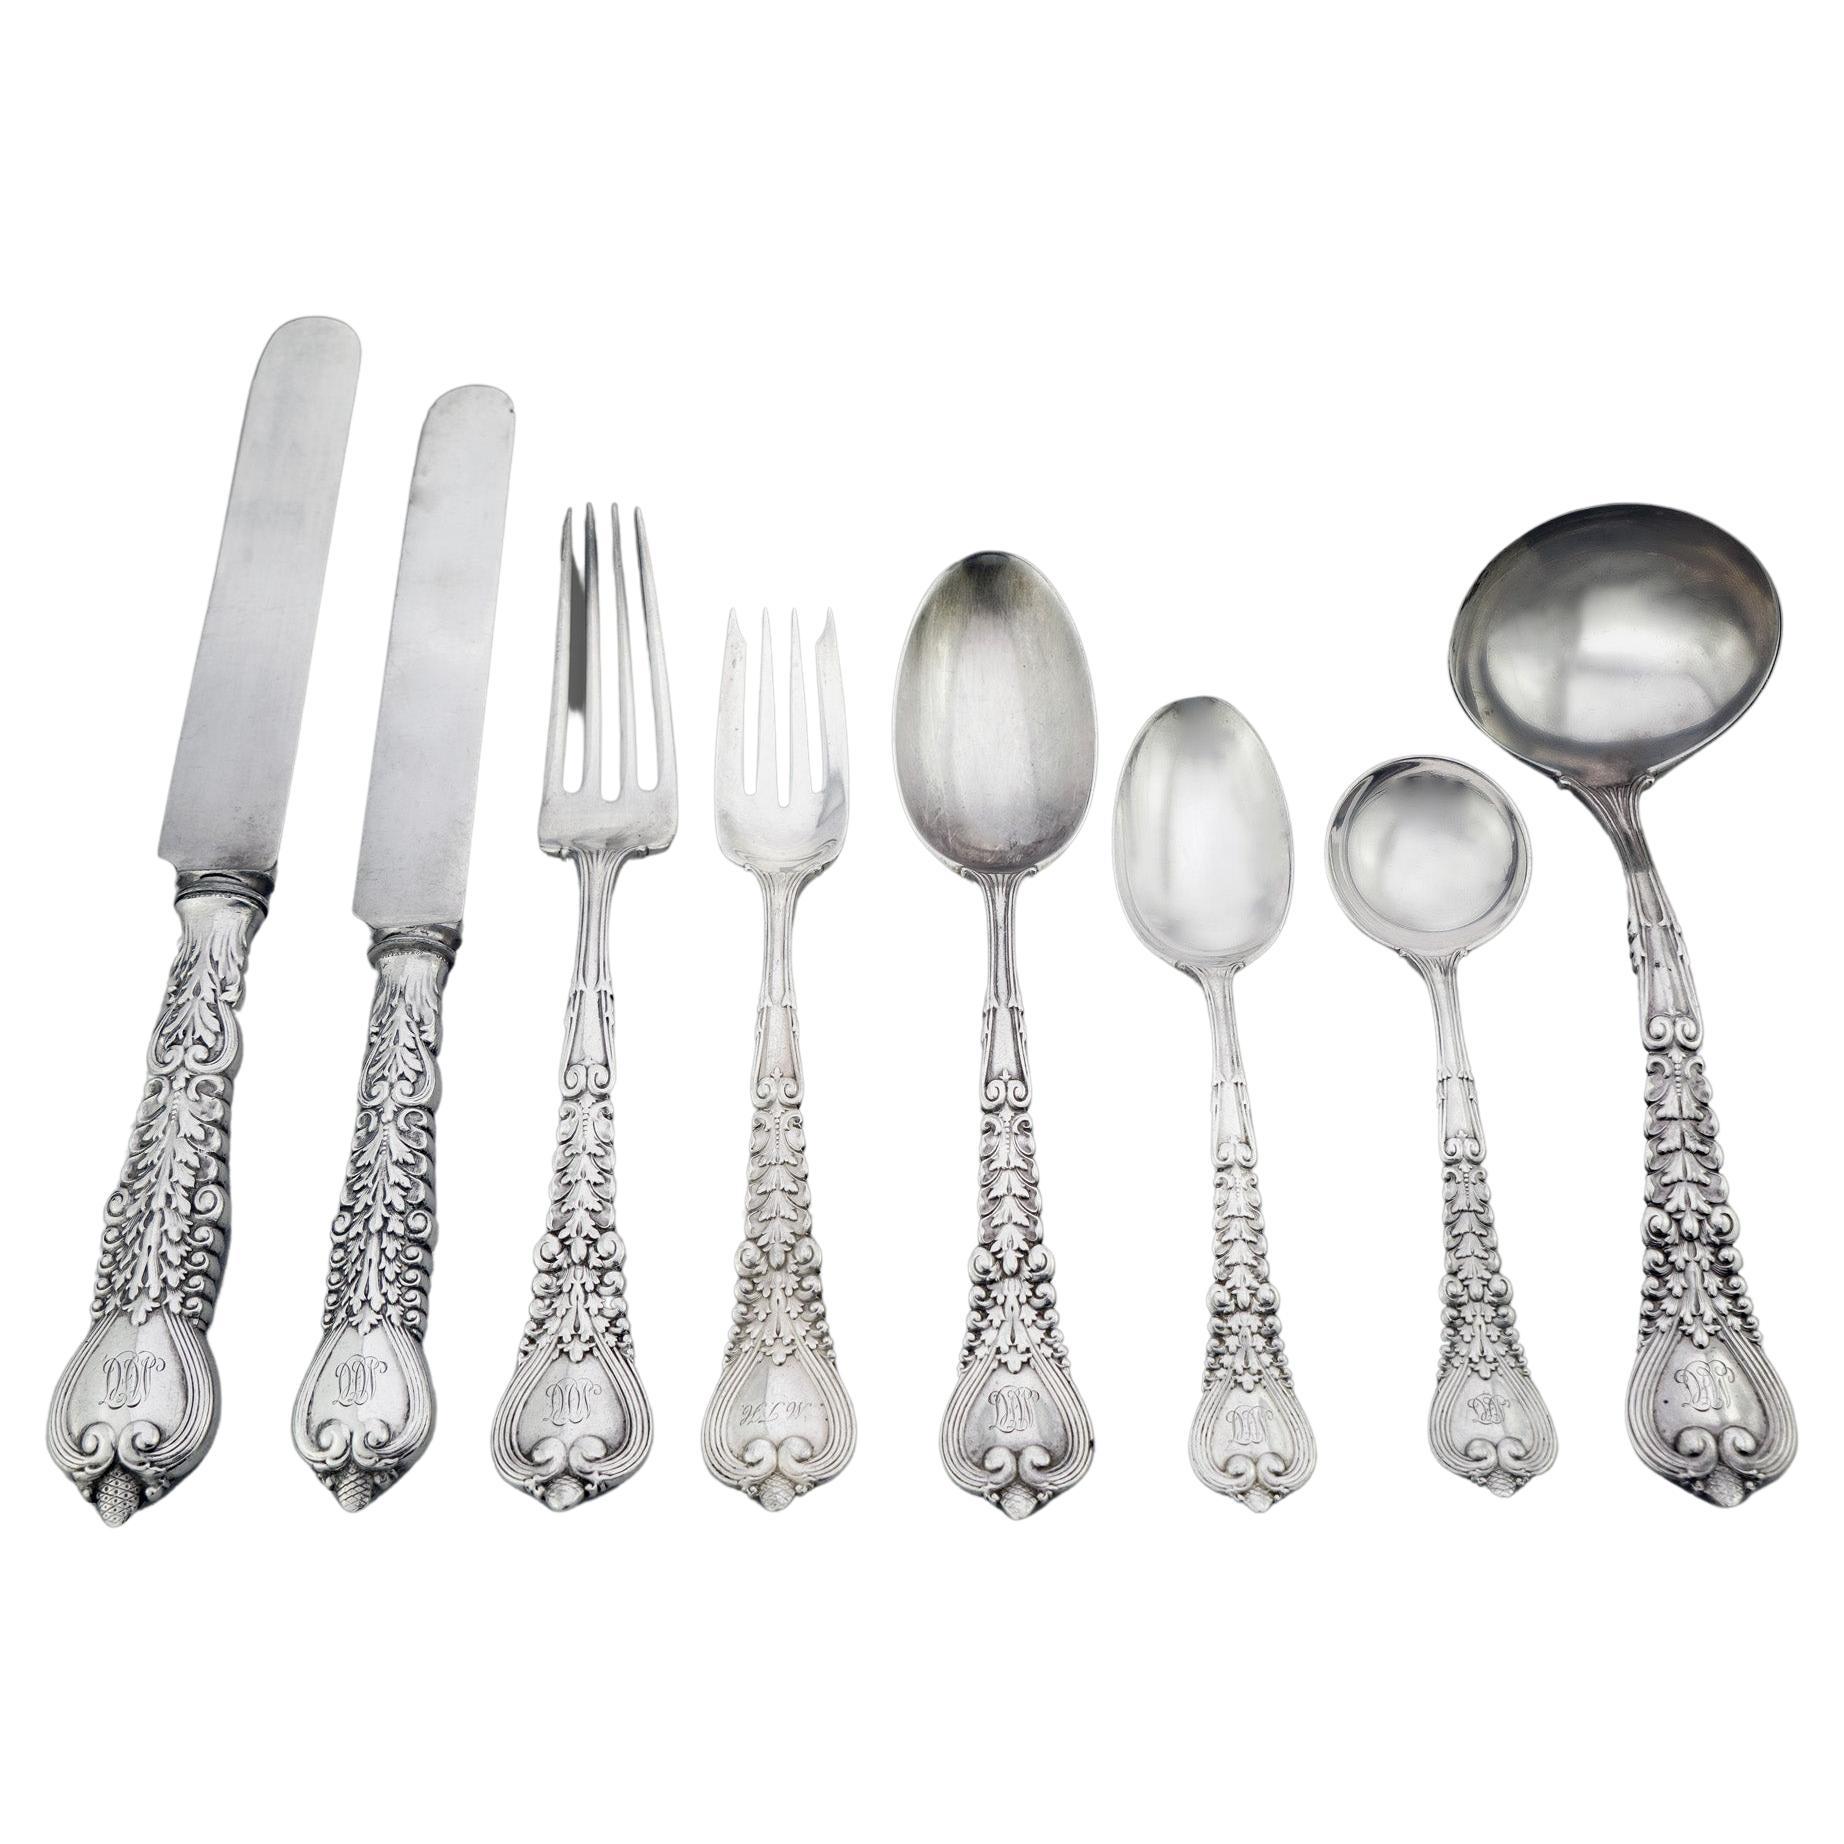 Tiffany & Co sterling silver cutlery set of 8 pieces in a Florentine pattern For Sale